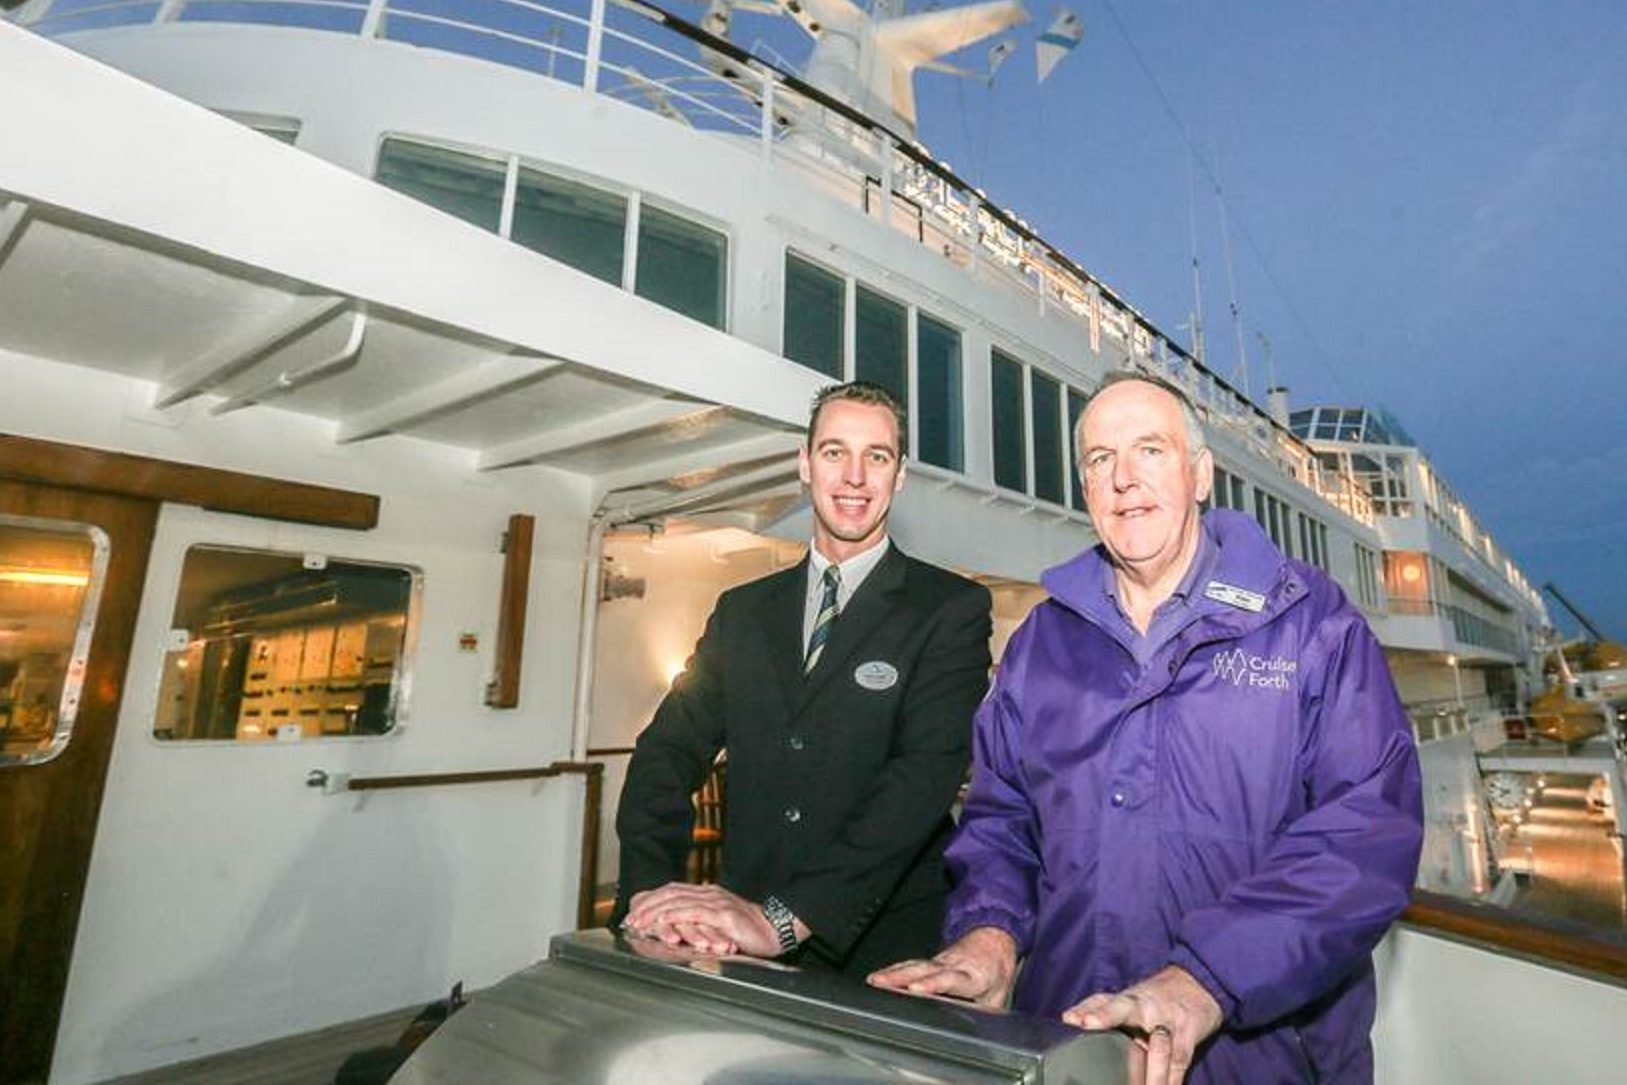 Simon Vickers, Olsen Cruise director, and Peter Wilson, project manager of Cruise Forth.